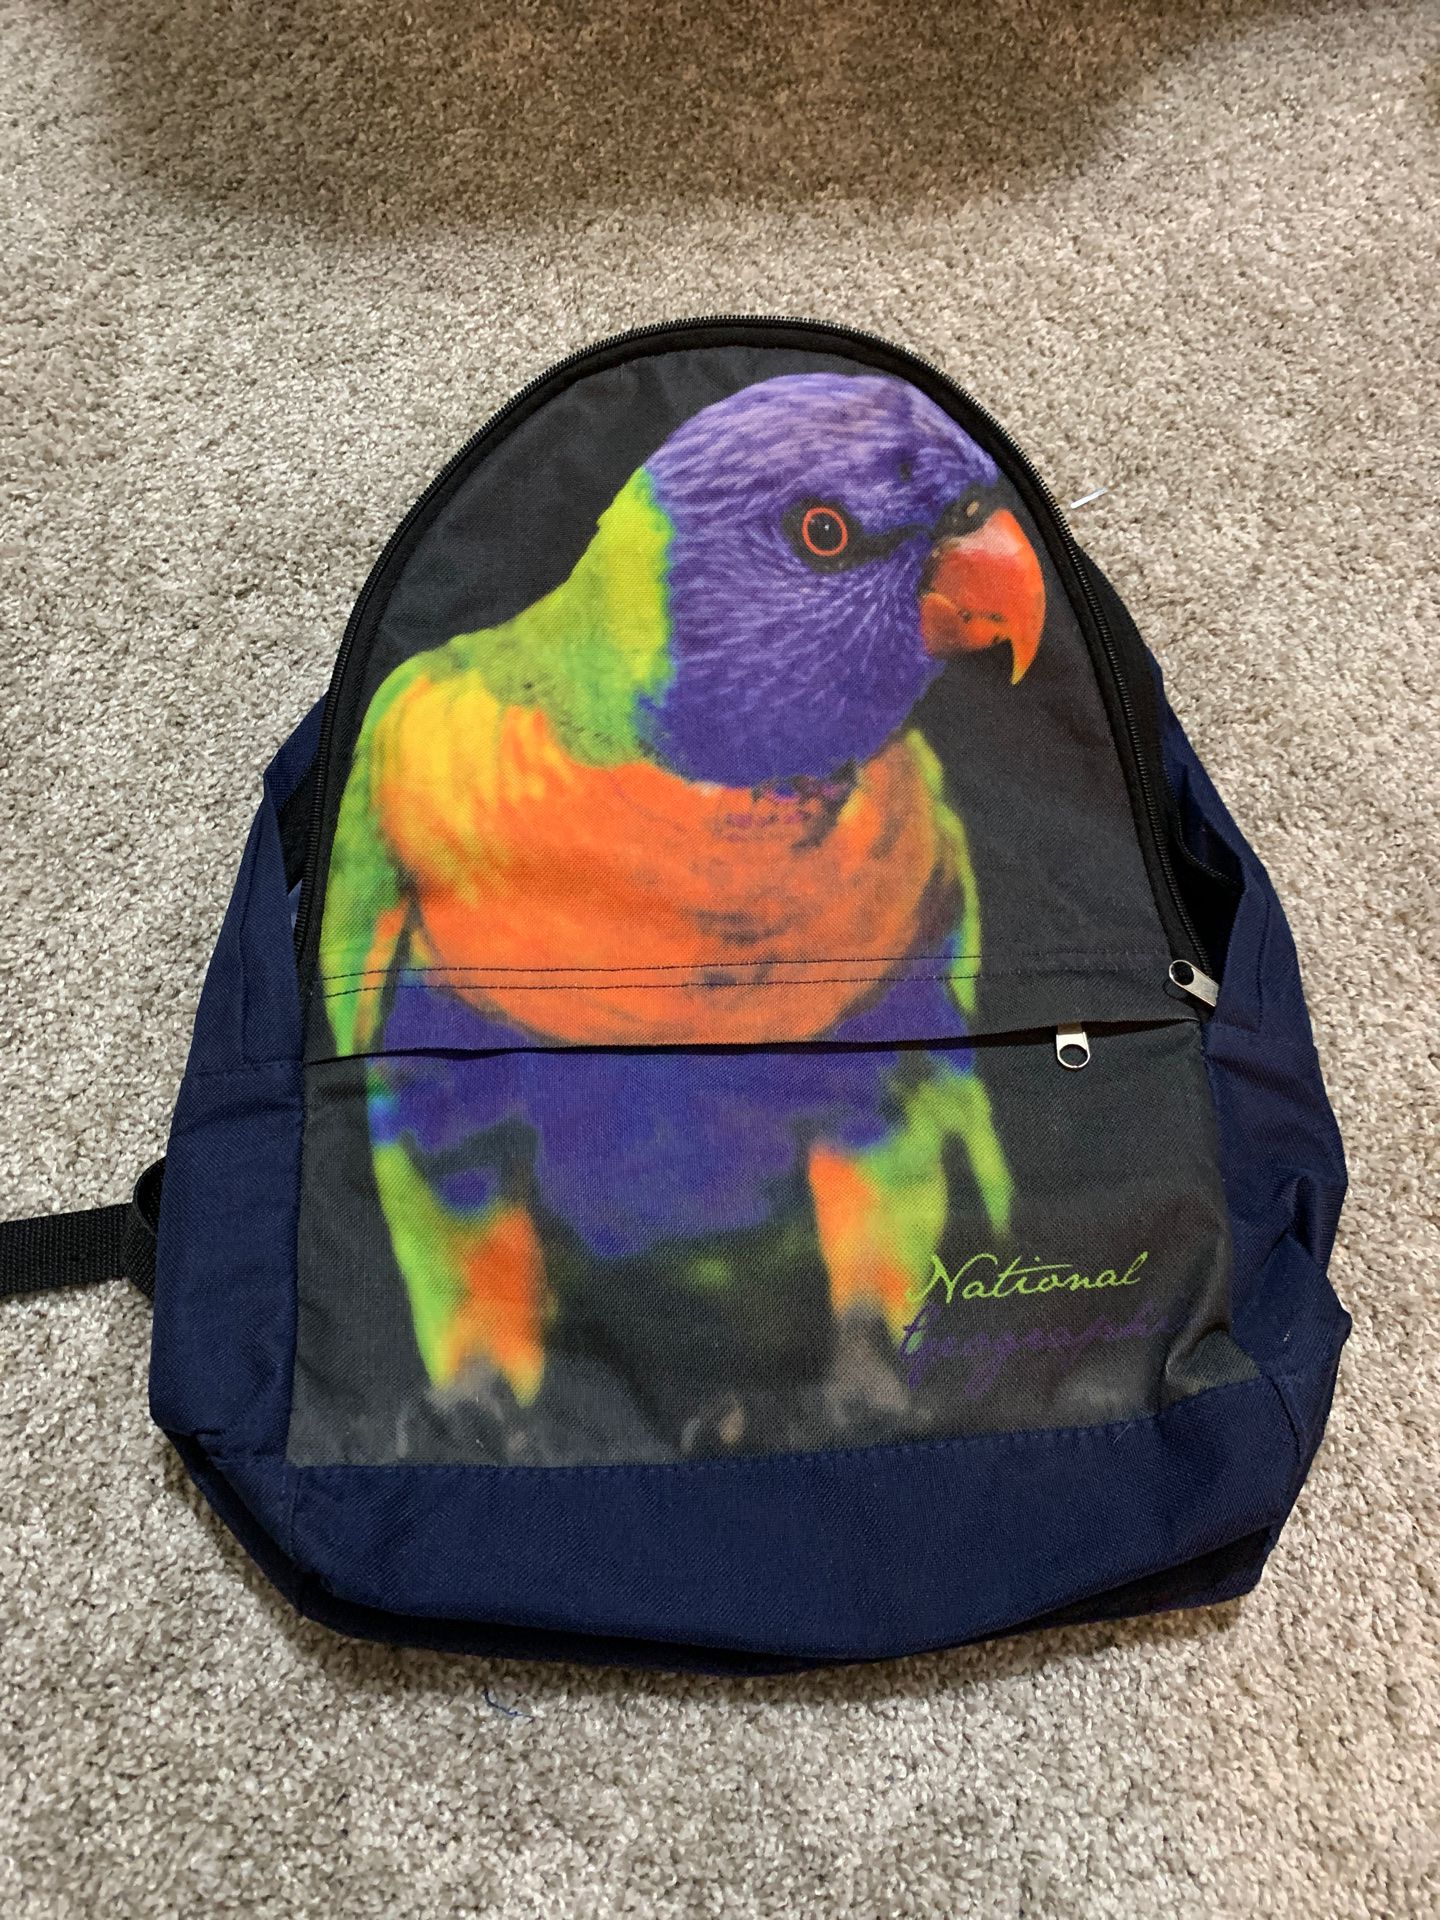 Backpack with laptop pocket, $7